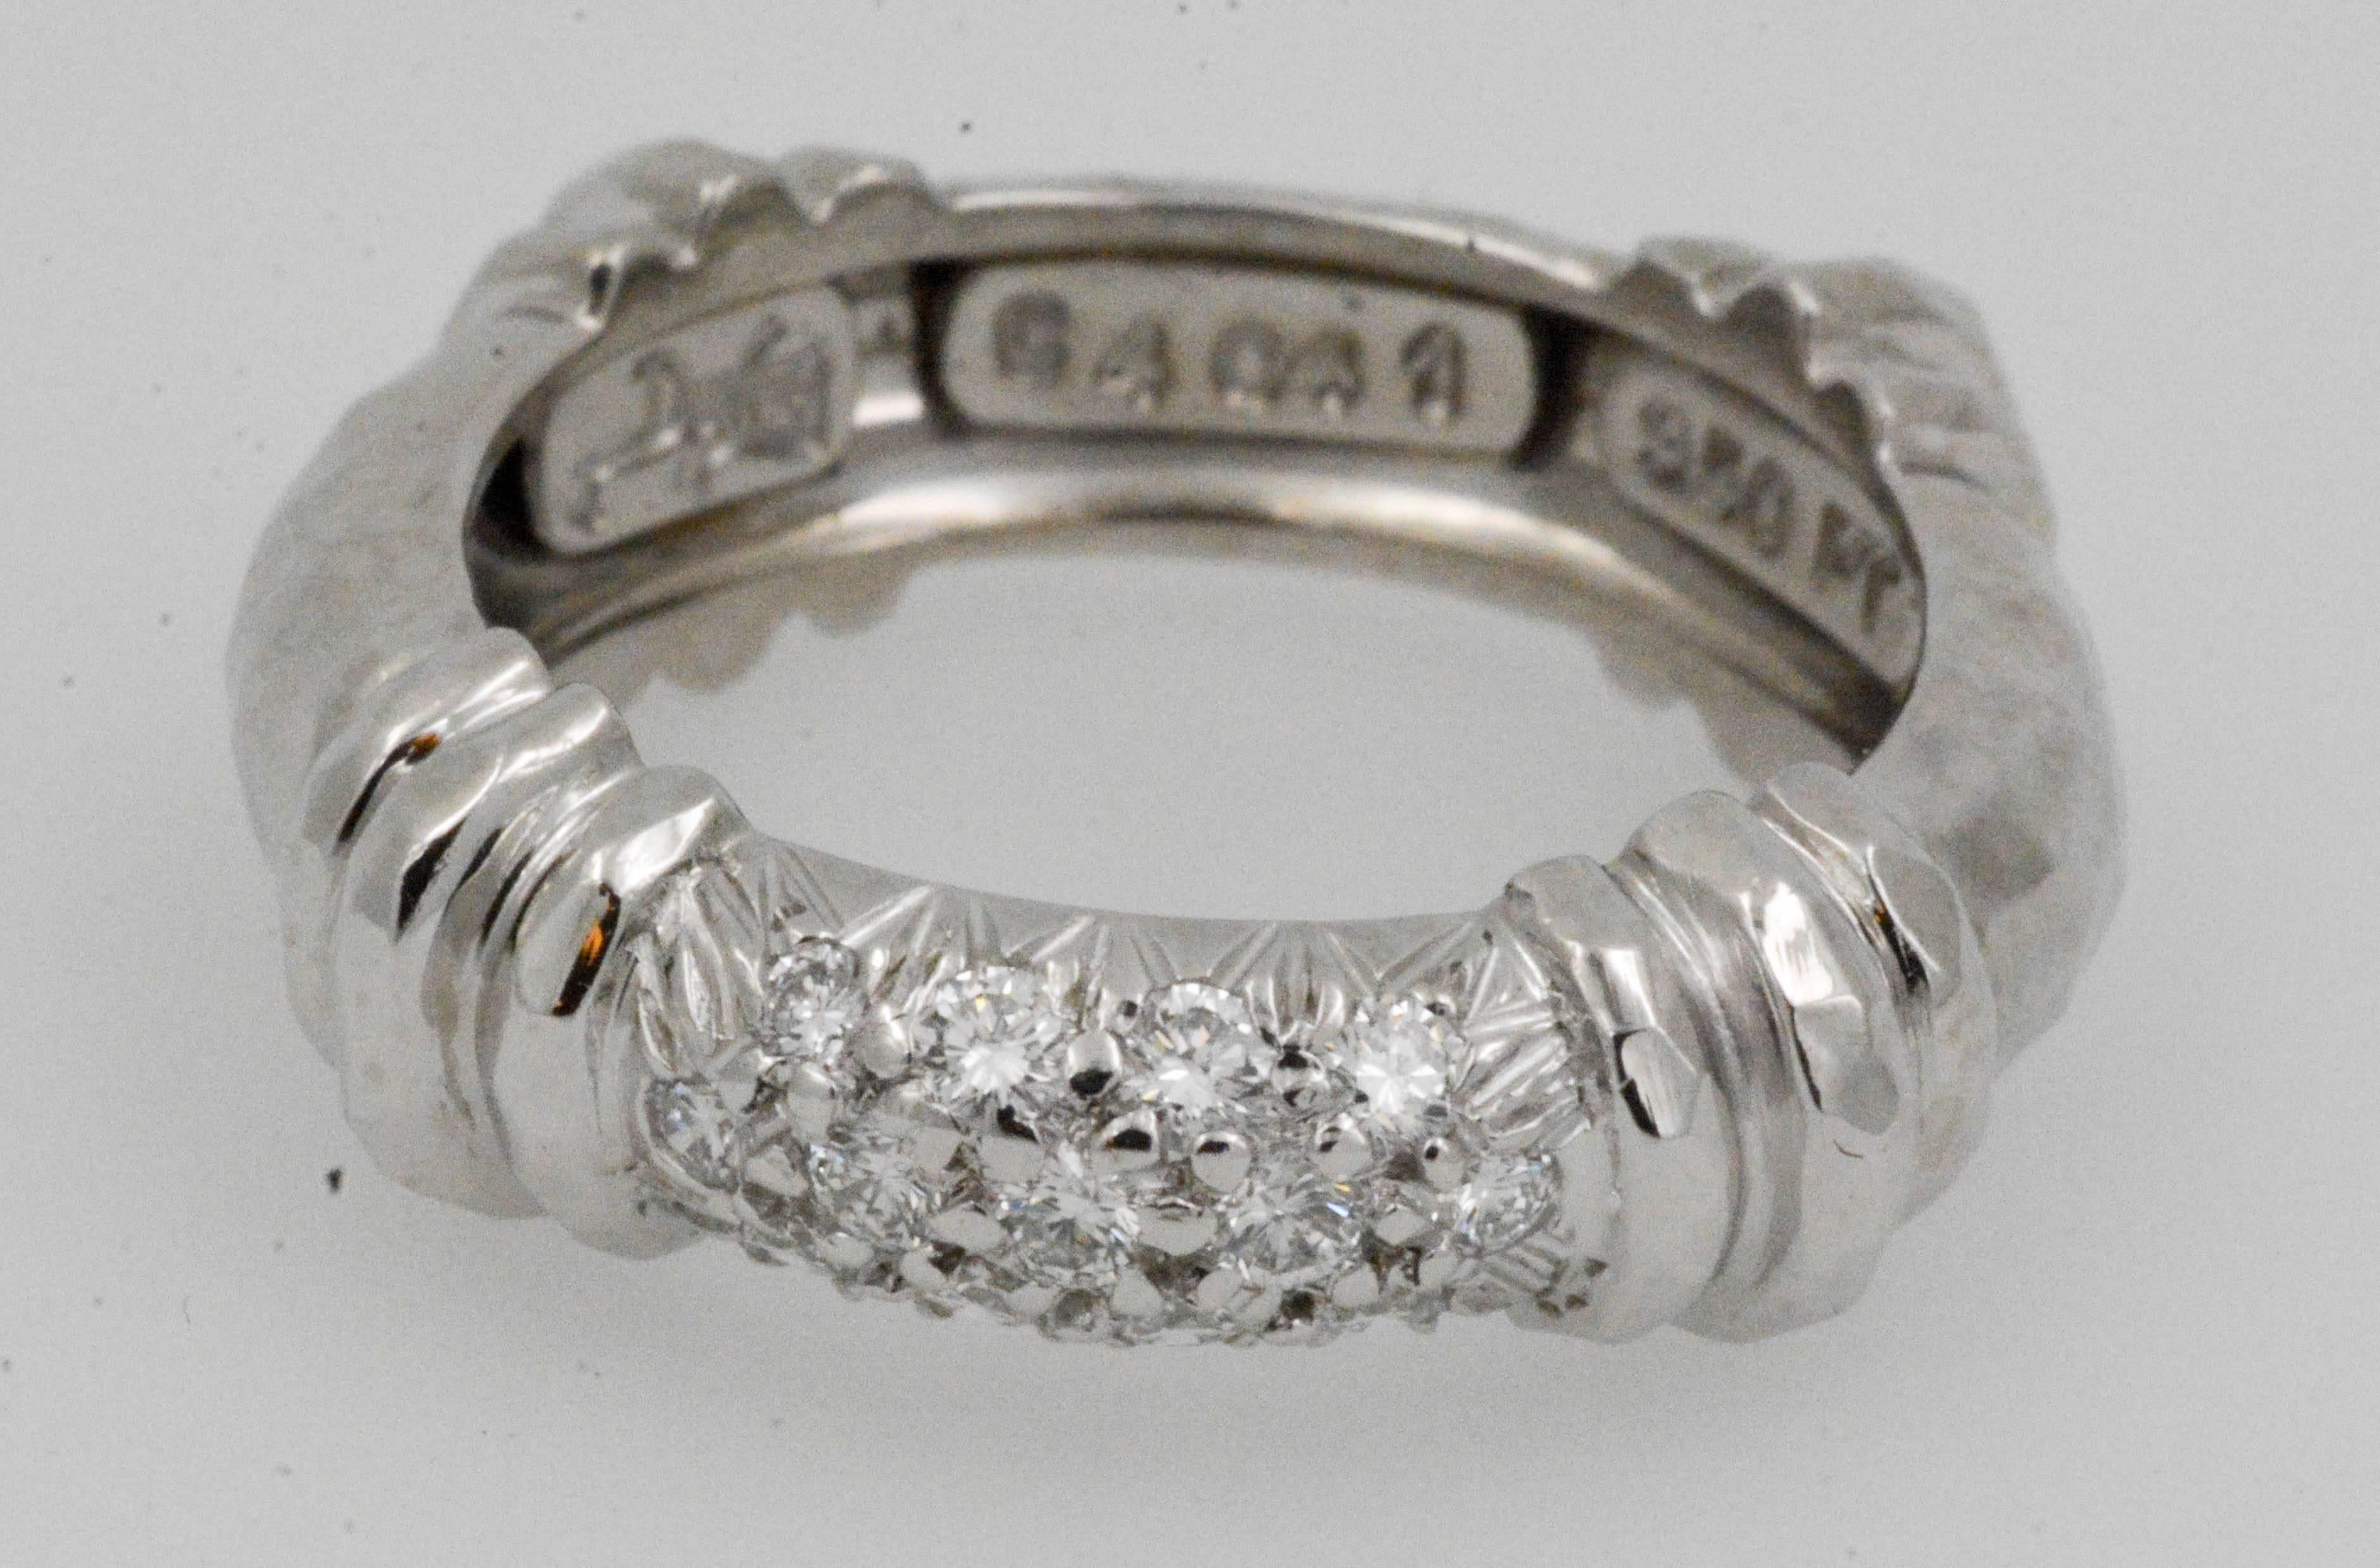 Captivating, exquisite and not your ordinary platinum band with pave set diamonds created by Henry Dunay. This 1980's platinum ring is a fabulous creation with finely hand-etched faceted finishes. 13 round brilliant cut diamonds are pave set (.30